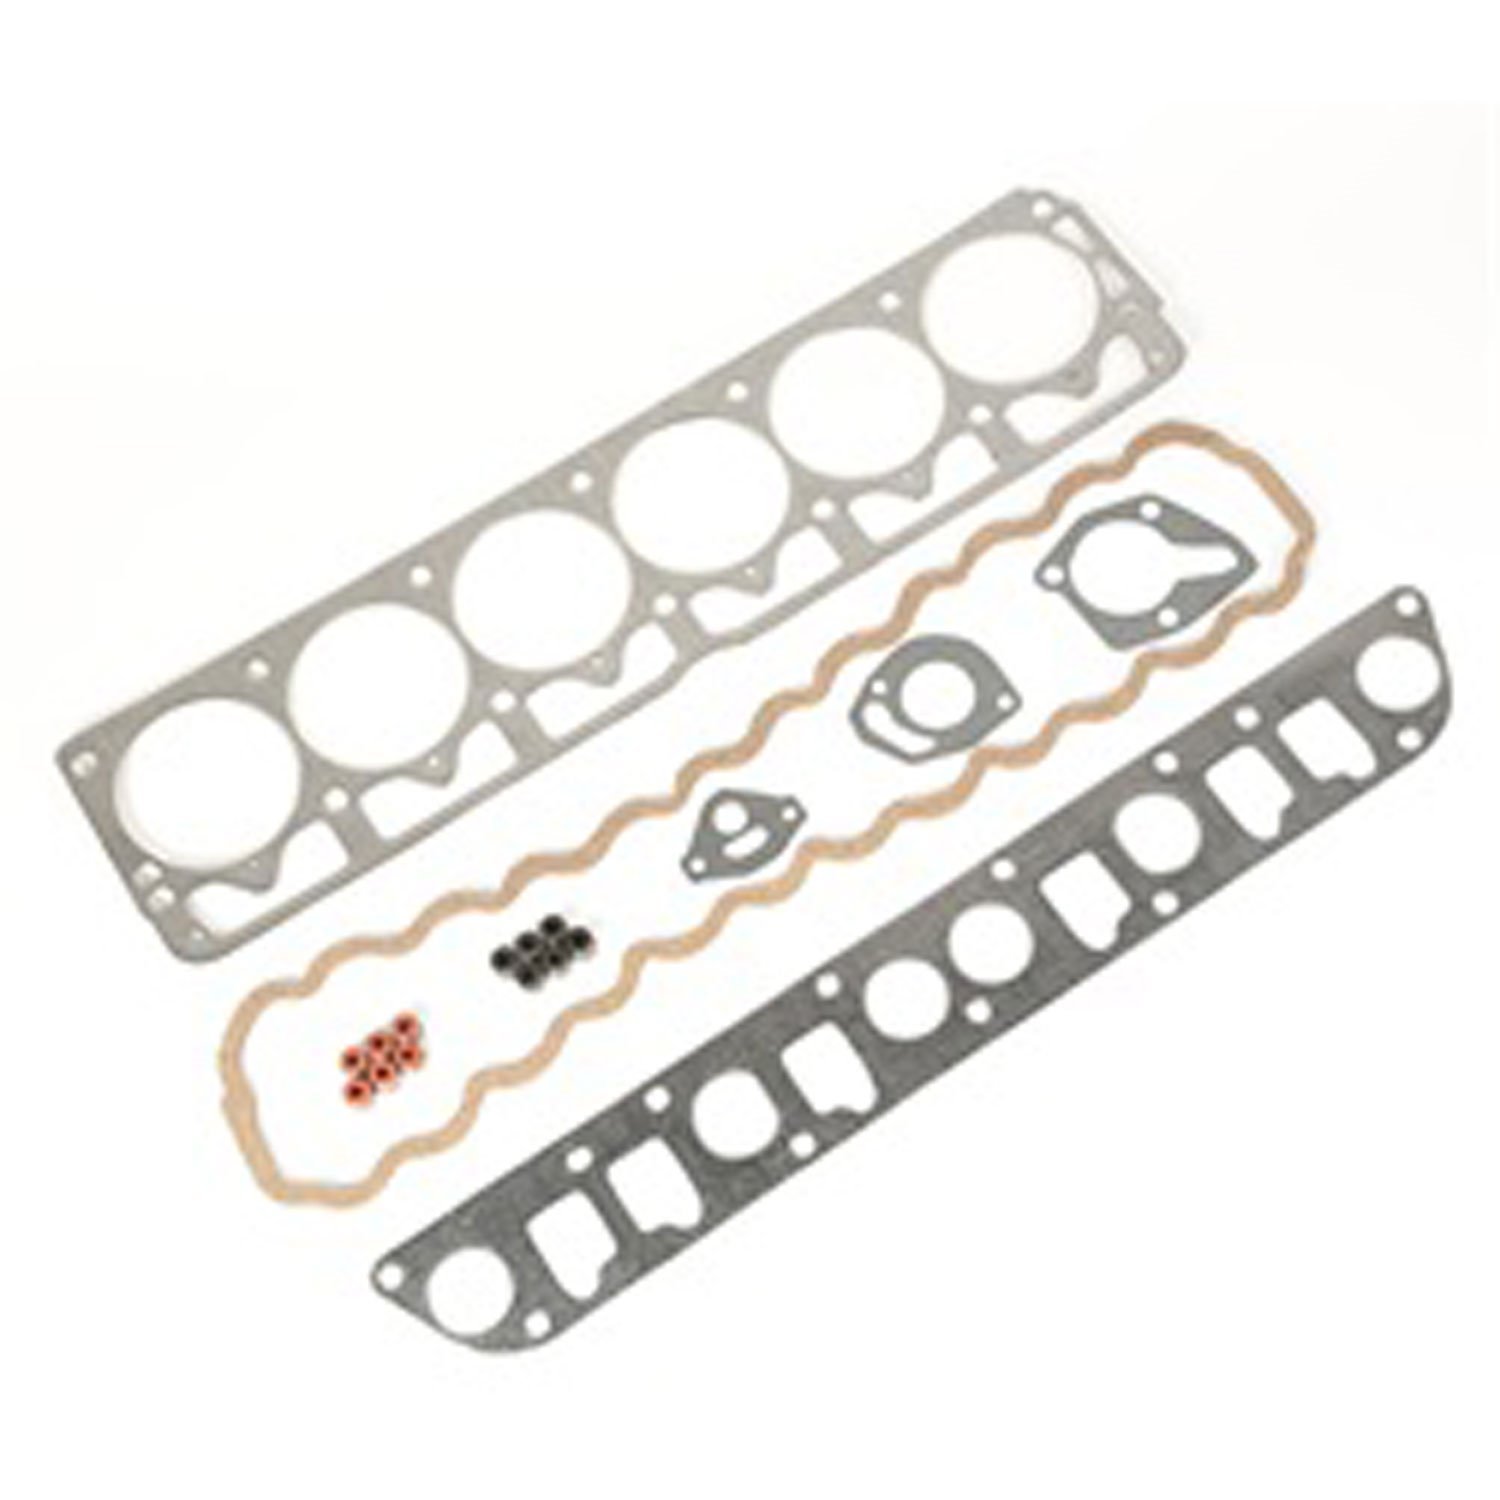 This upper engine gasket set from Omix-ADA fits the 4.0L engine used in 87-90 Jeep Comanches MJ and Cherokees XJ